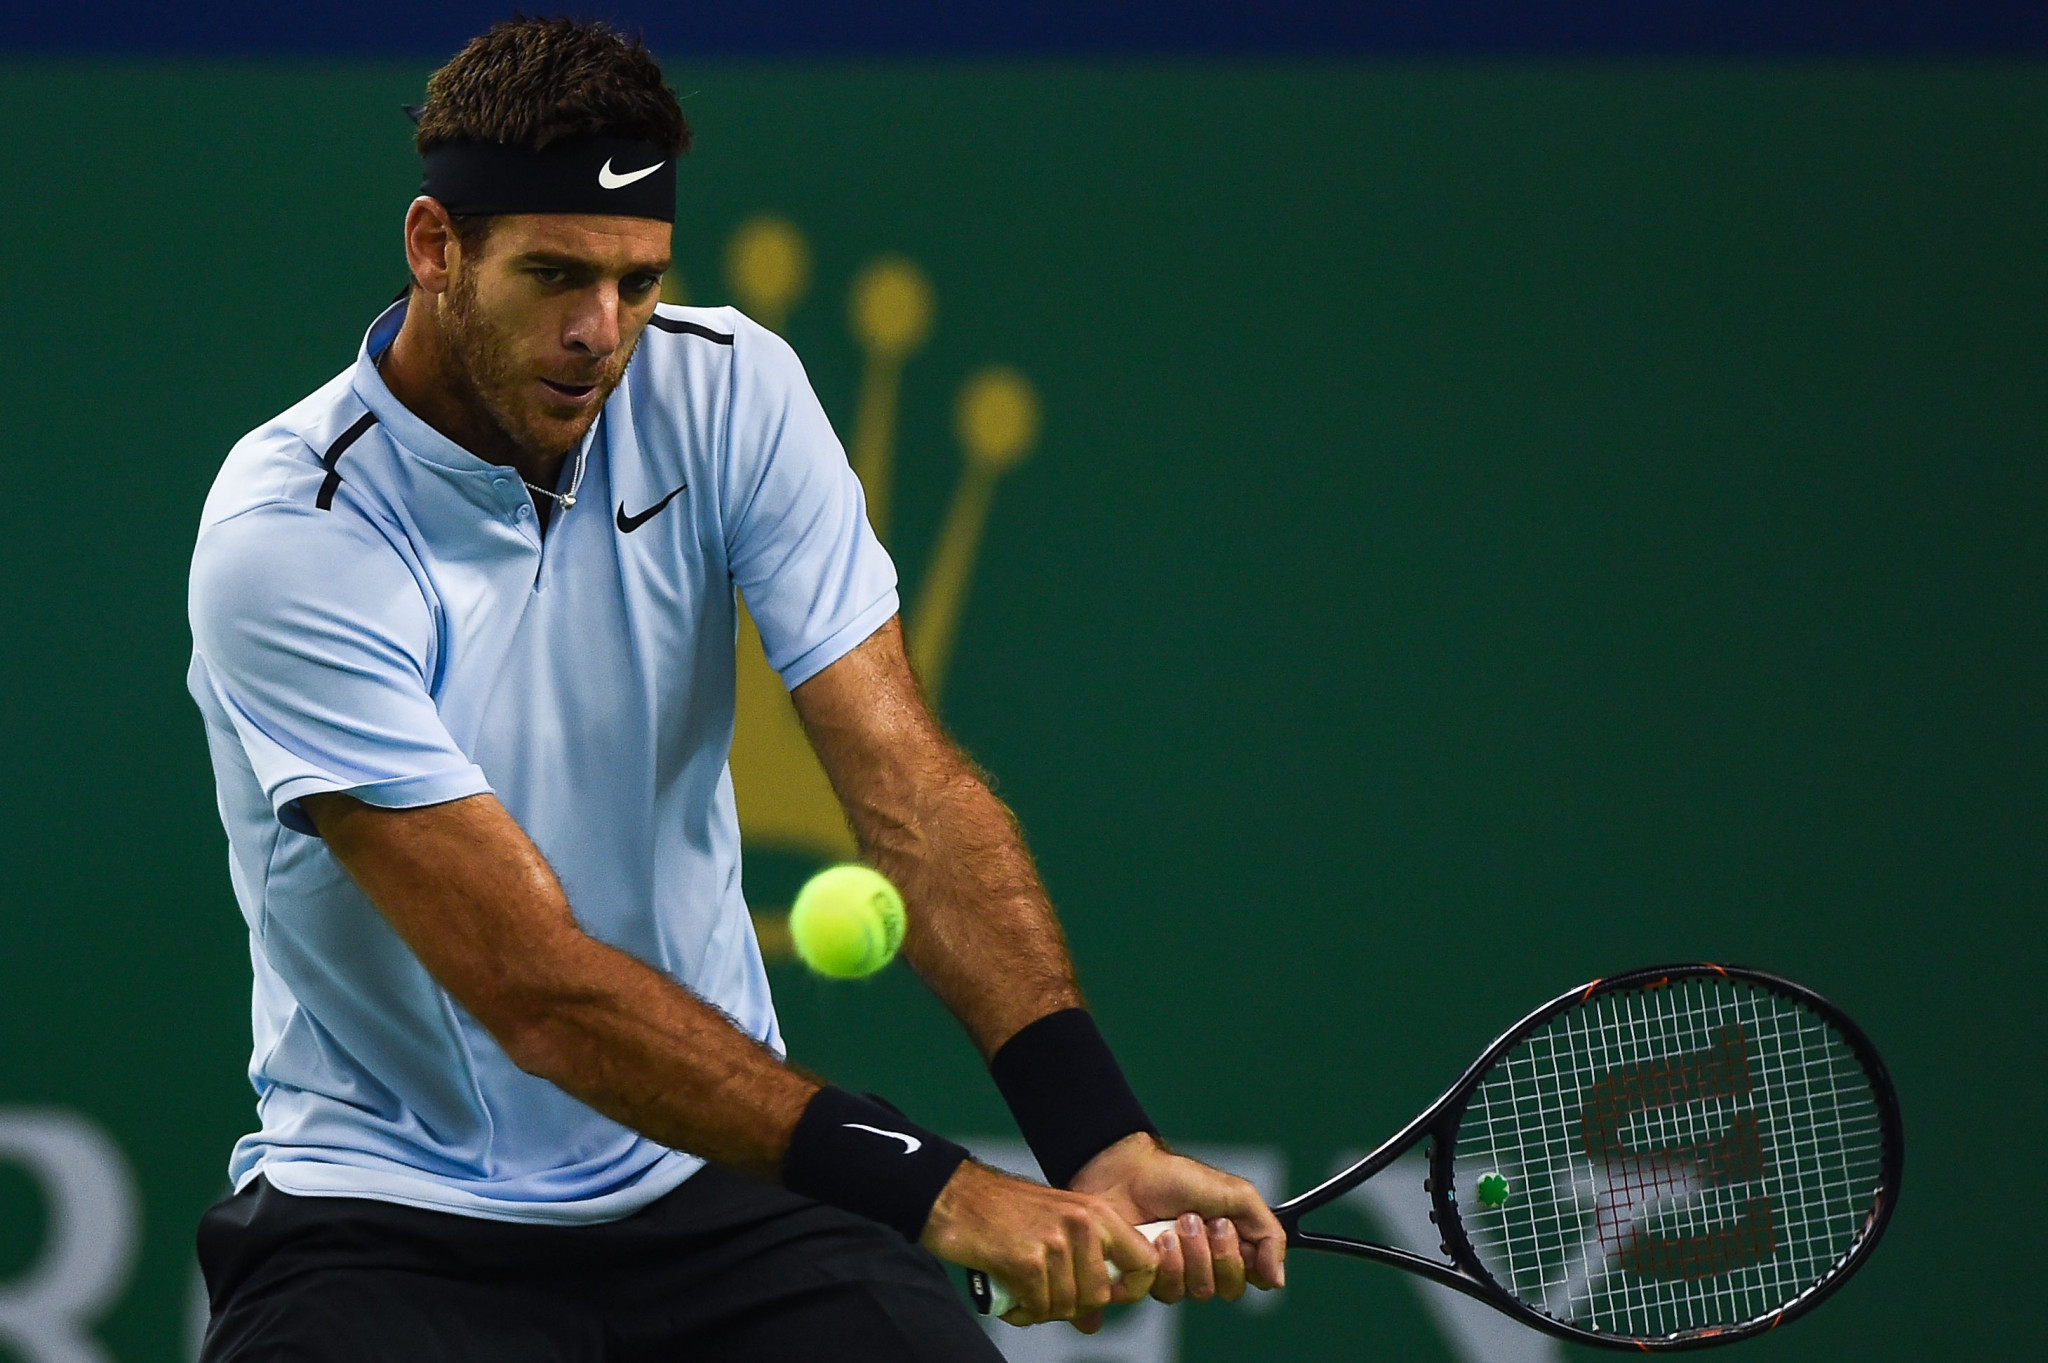 Juan Martin del Potro came from behind to make the quarter-finals ©Getty Images